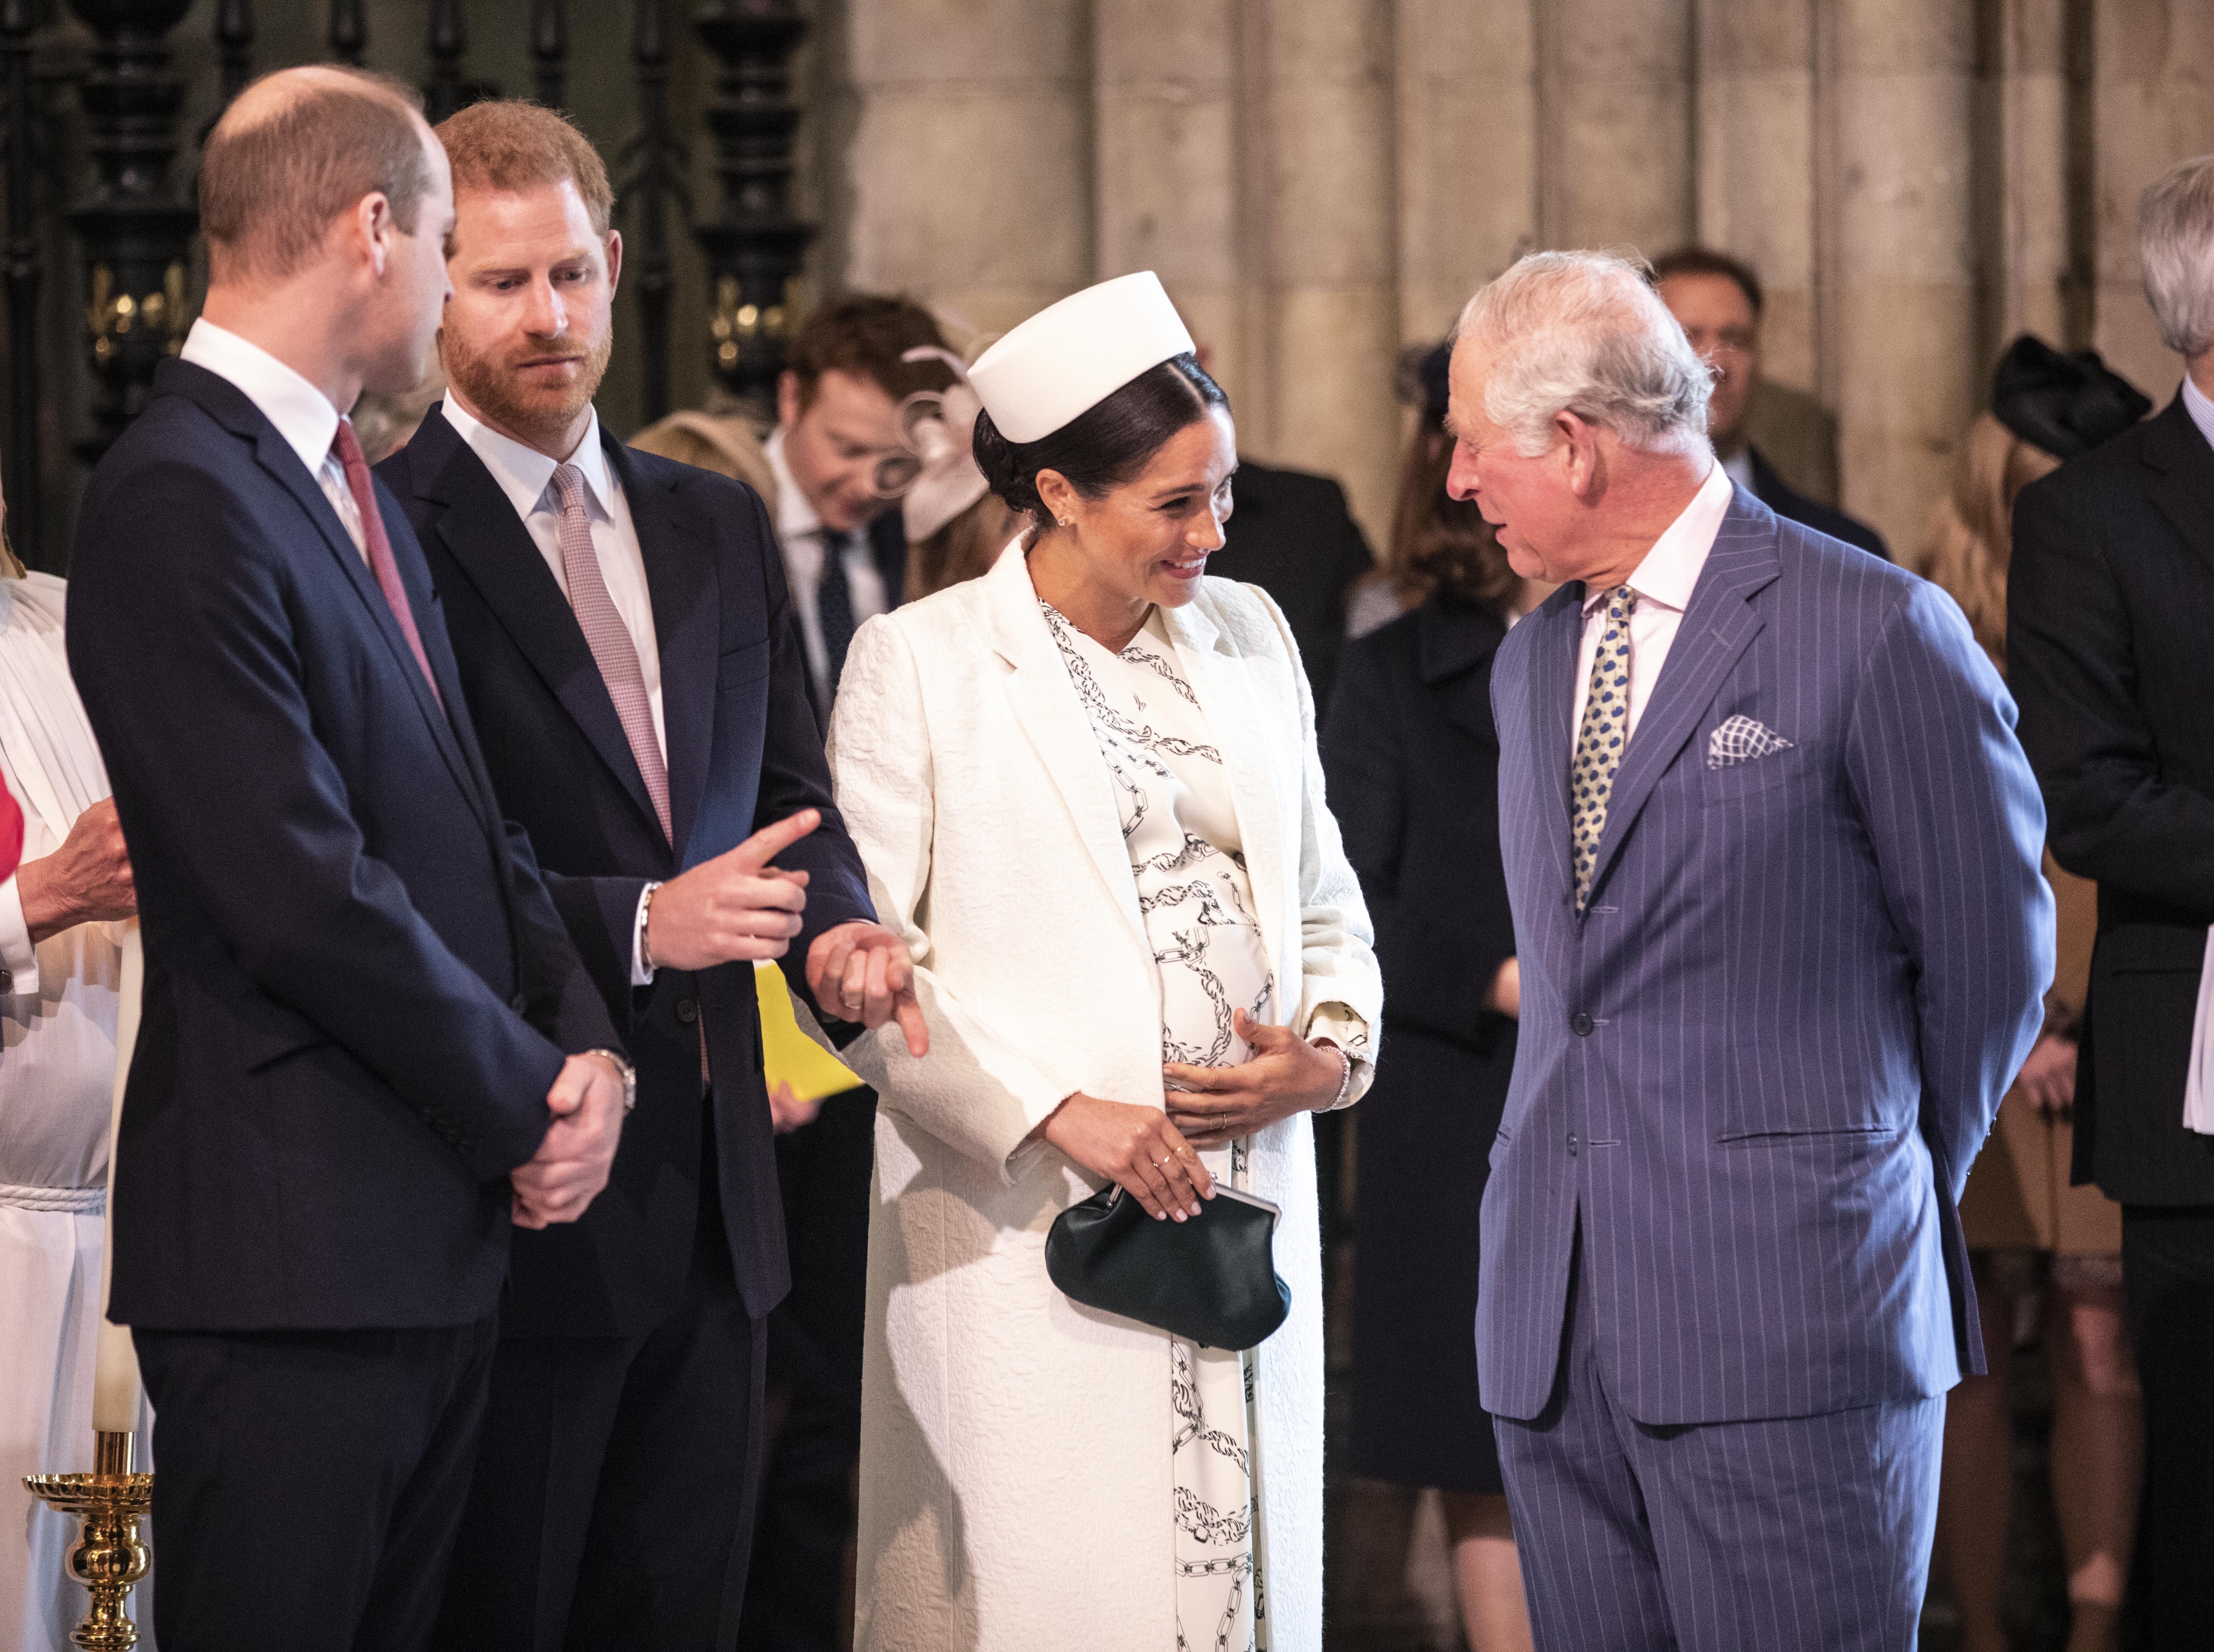 Duchess Meghan talks with Prince Charles while Prince William and Prince Harry conversate at the Westminster Abbey Commonwealth day service on March 11, 2019, in London, England | Source: Getty Images